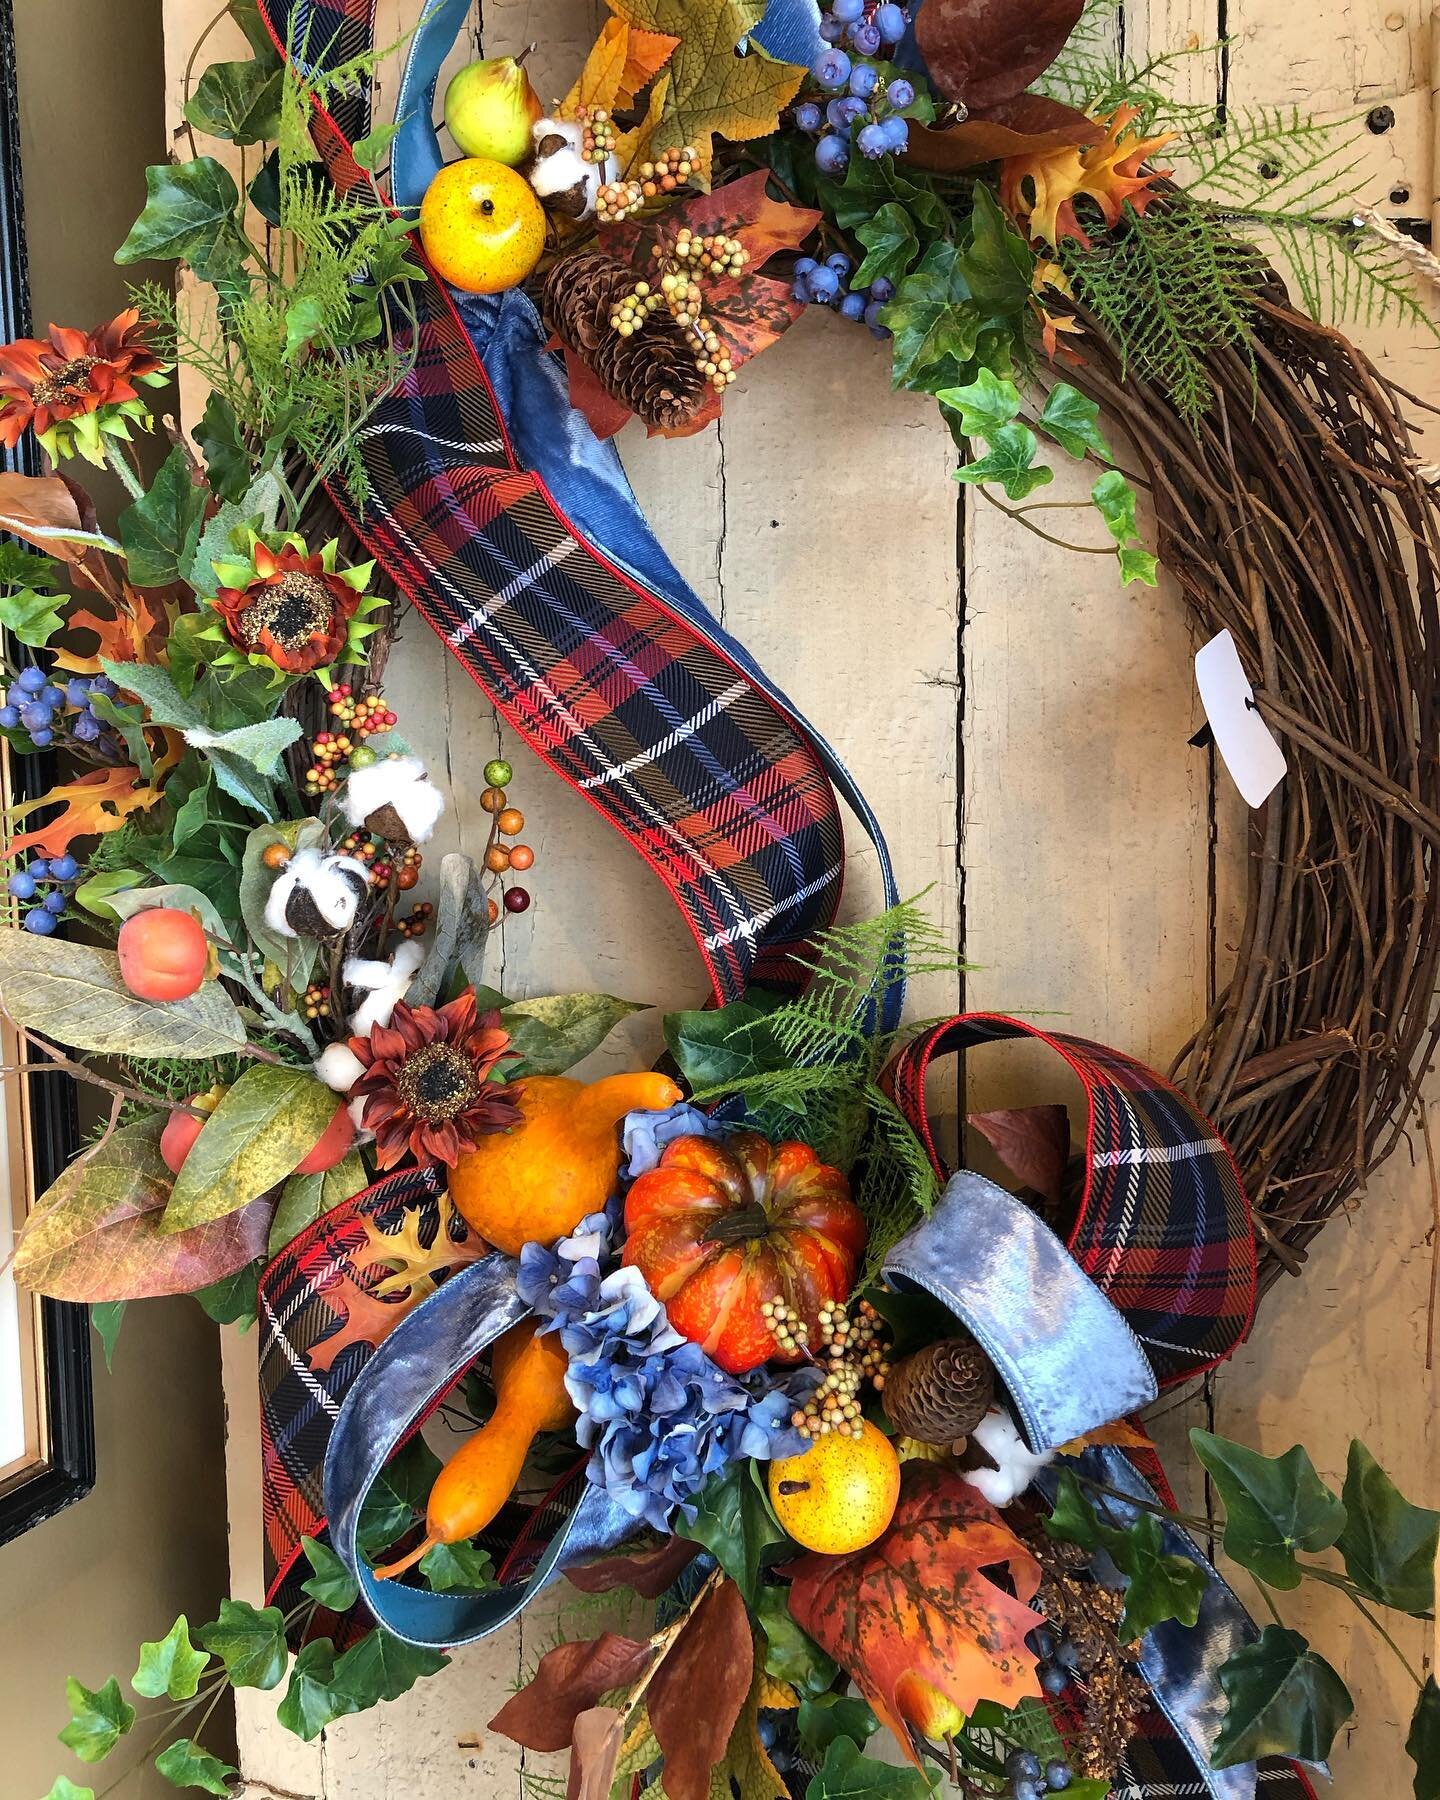 Fall Open House, &ldquo;Giving Thanks&rdquo;, starts today @lloydandlady boutiques!  Stop by and see all the beautiful, one of a kind,  Fall wreaths!
. 
.
.
#fall #falldecor #fallwreath #fallwreaths #wreath #floraldesign #customfloraldesign #shoploca